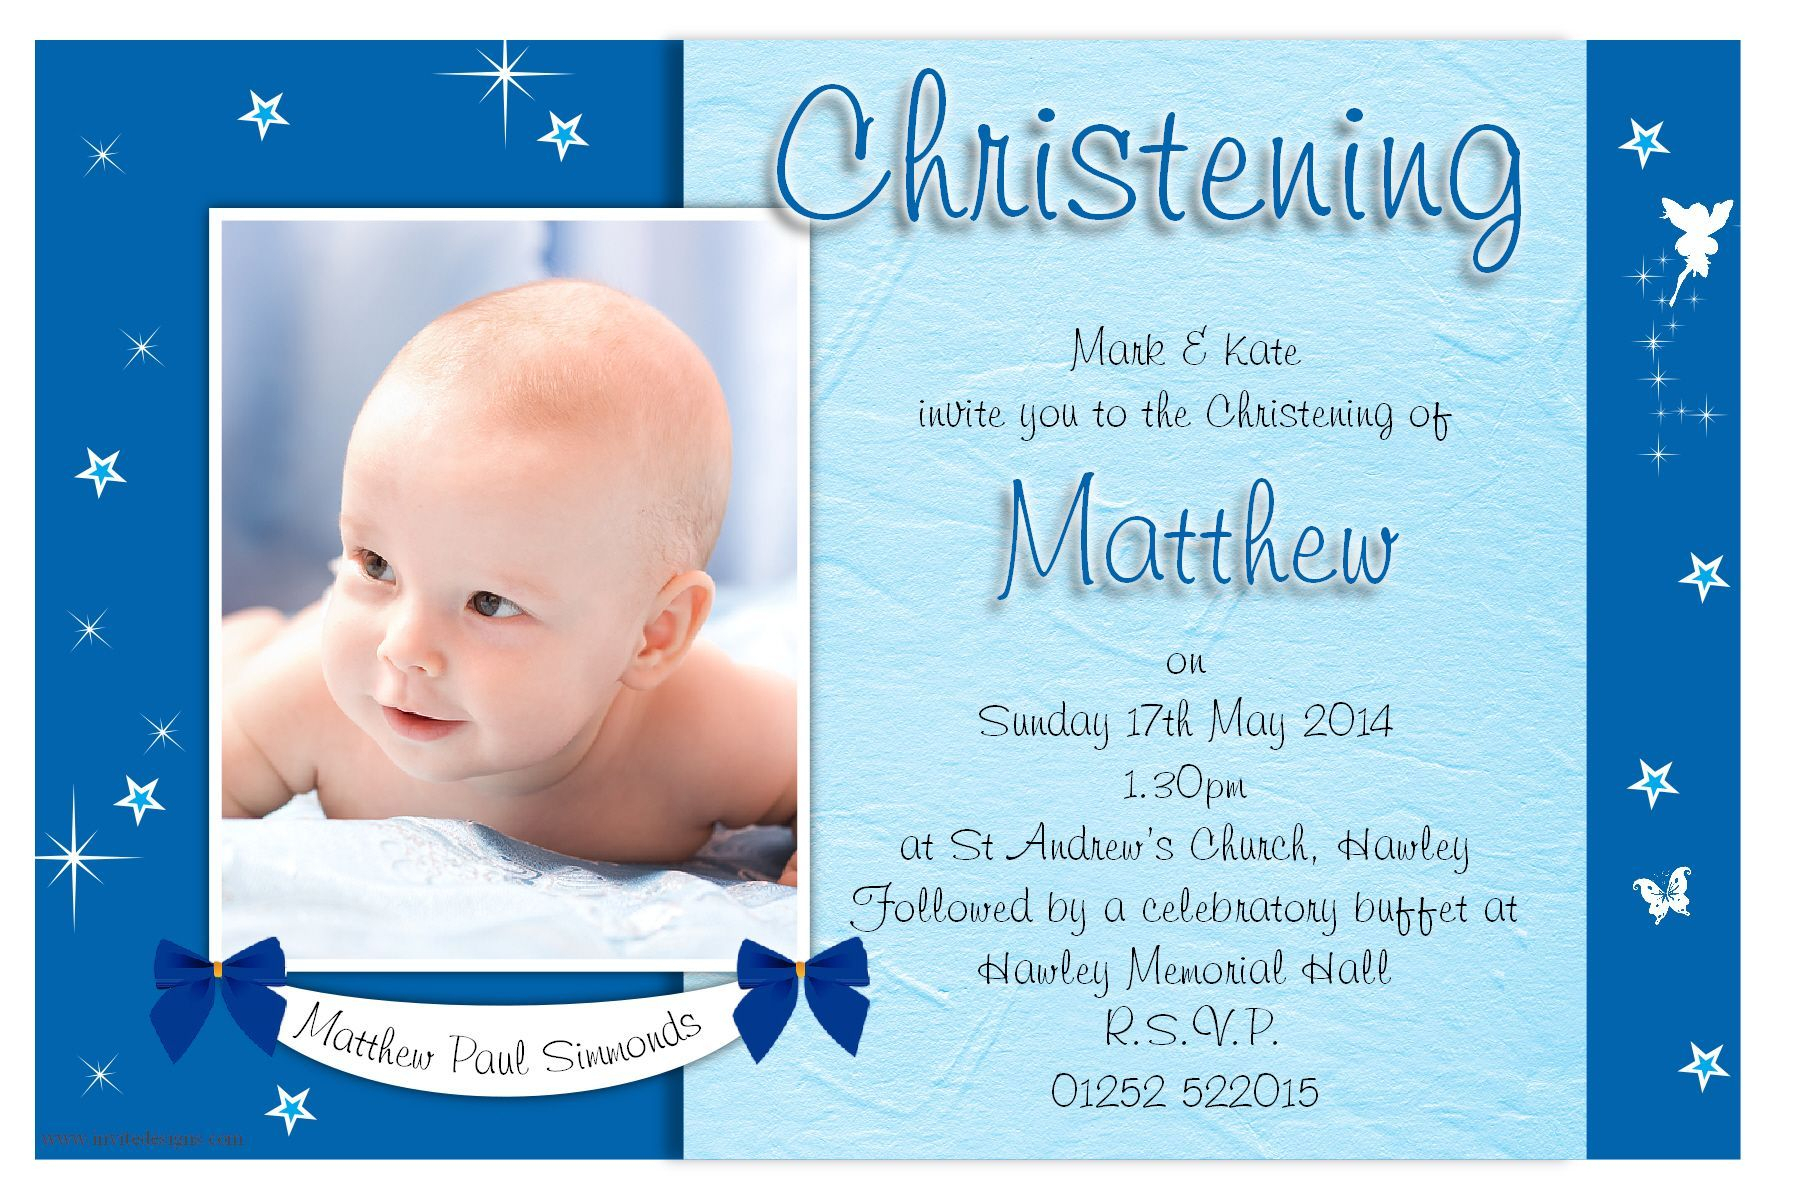 Free Christening Invitation Template Printable | Cakes In Intended For Free Christening Invitation Cards Templates